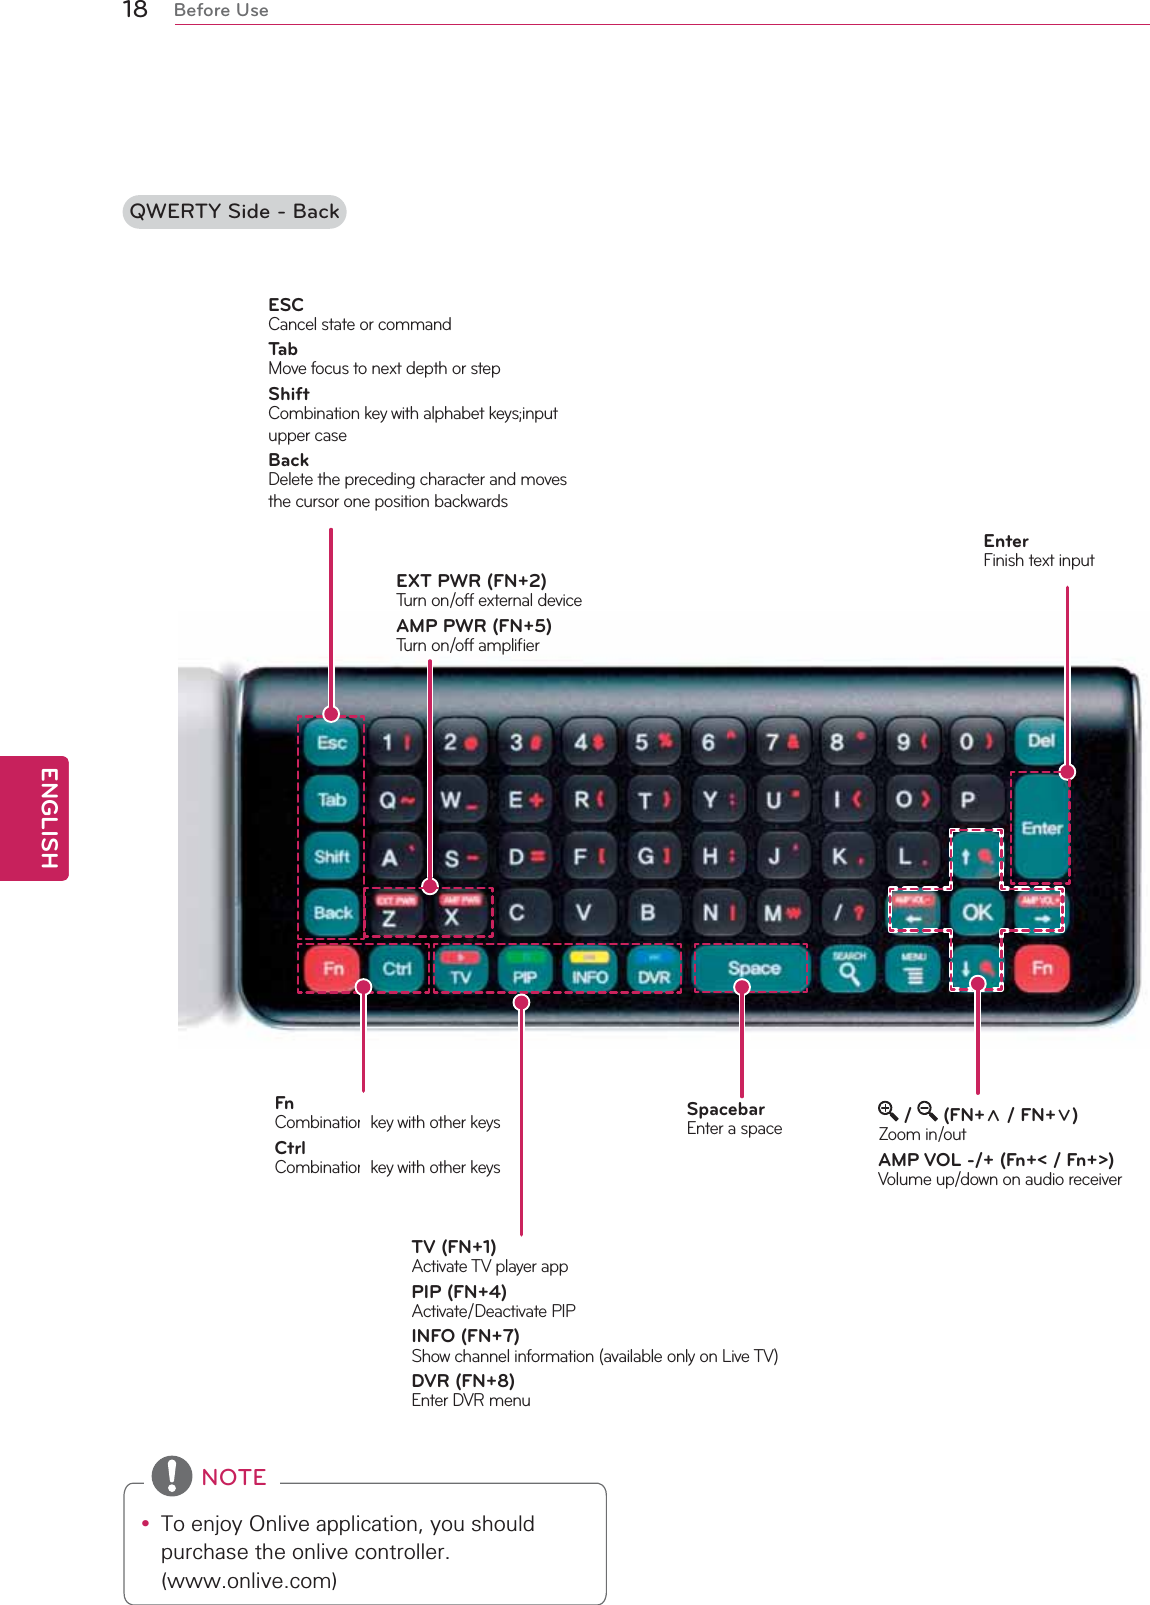 18ENGENGLISHBefore UseQWERTY Side - BackEXT PWR (FN+2)Turn on/off external deviceAMP PWR (FN+5)Turn on/off ampliﬁerFnCombination key with other keysCtrlCombination key with other keysSpacebarEnter a space /   (FN+ن / FN+ه)Zoom in/outAMP VOL -/+ (Fn+&lt; / Fn+&gt;)Volume up/down on audio receiverEnterFinish text inputy To enjoy Onlive application, you should purchase the onlive controller. (www.onlive.com) NOTETV (FN+1)Activate TV player appPIP (FN+4)Activate/Deactivate PIPINFO (FN+7)Show channel information (available only on Live TV)DVR (FN+8)Enter DVR menuESCCancel state or commandTa bMove focus to next depth or stepShiftCombination key with alphabet keys;input upper caseBackDelete the preceding character and moves the cursor one position backwards